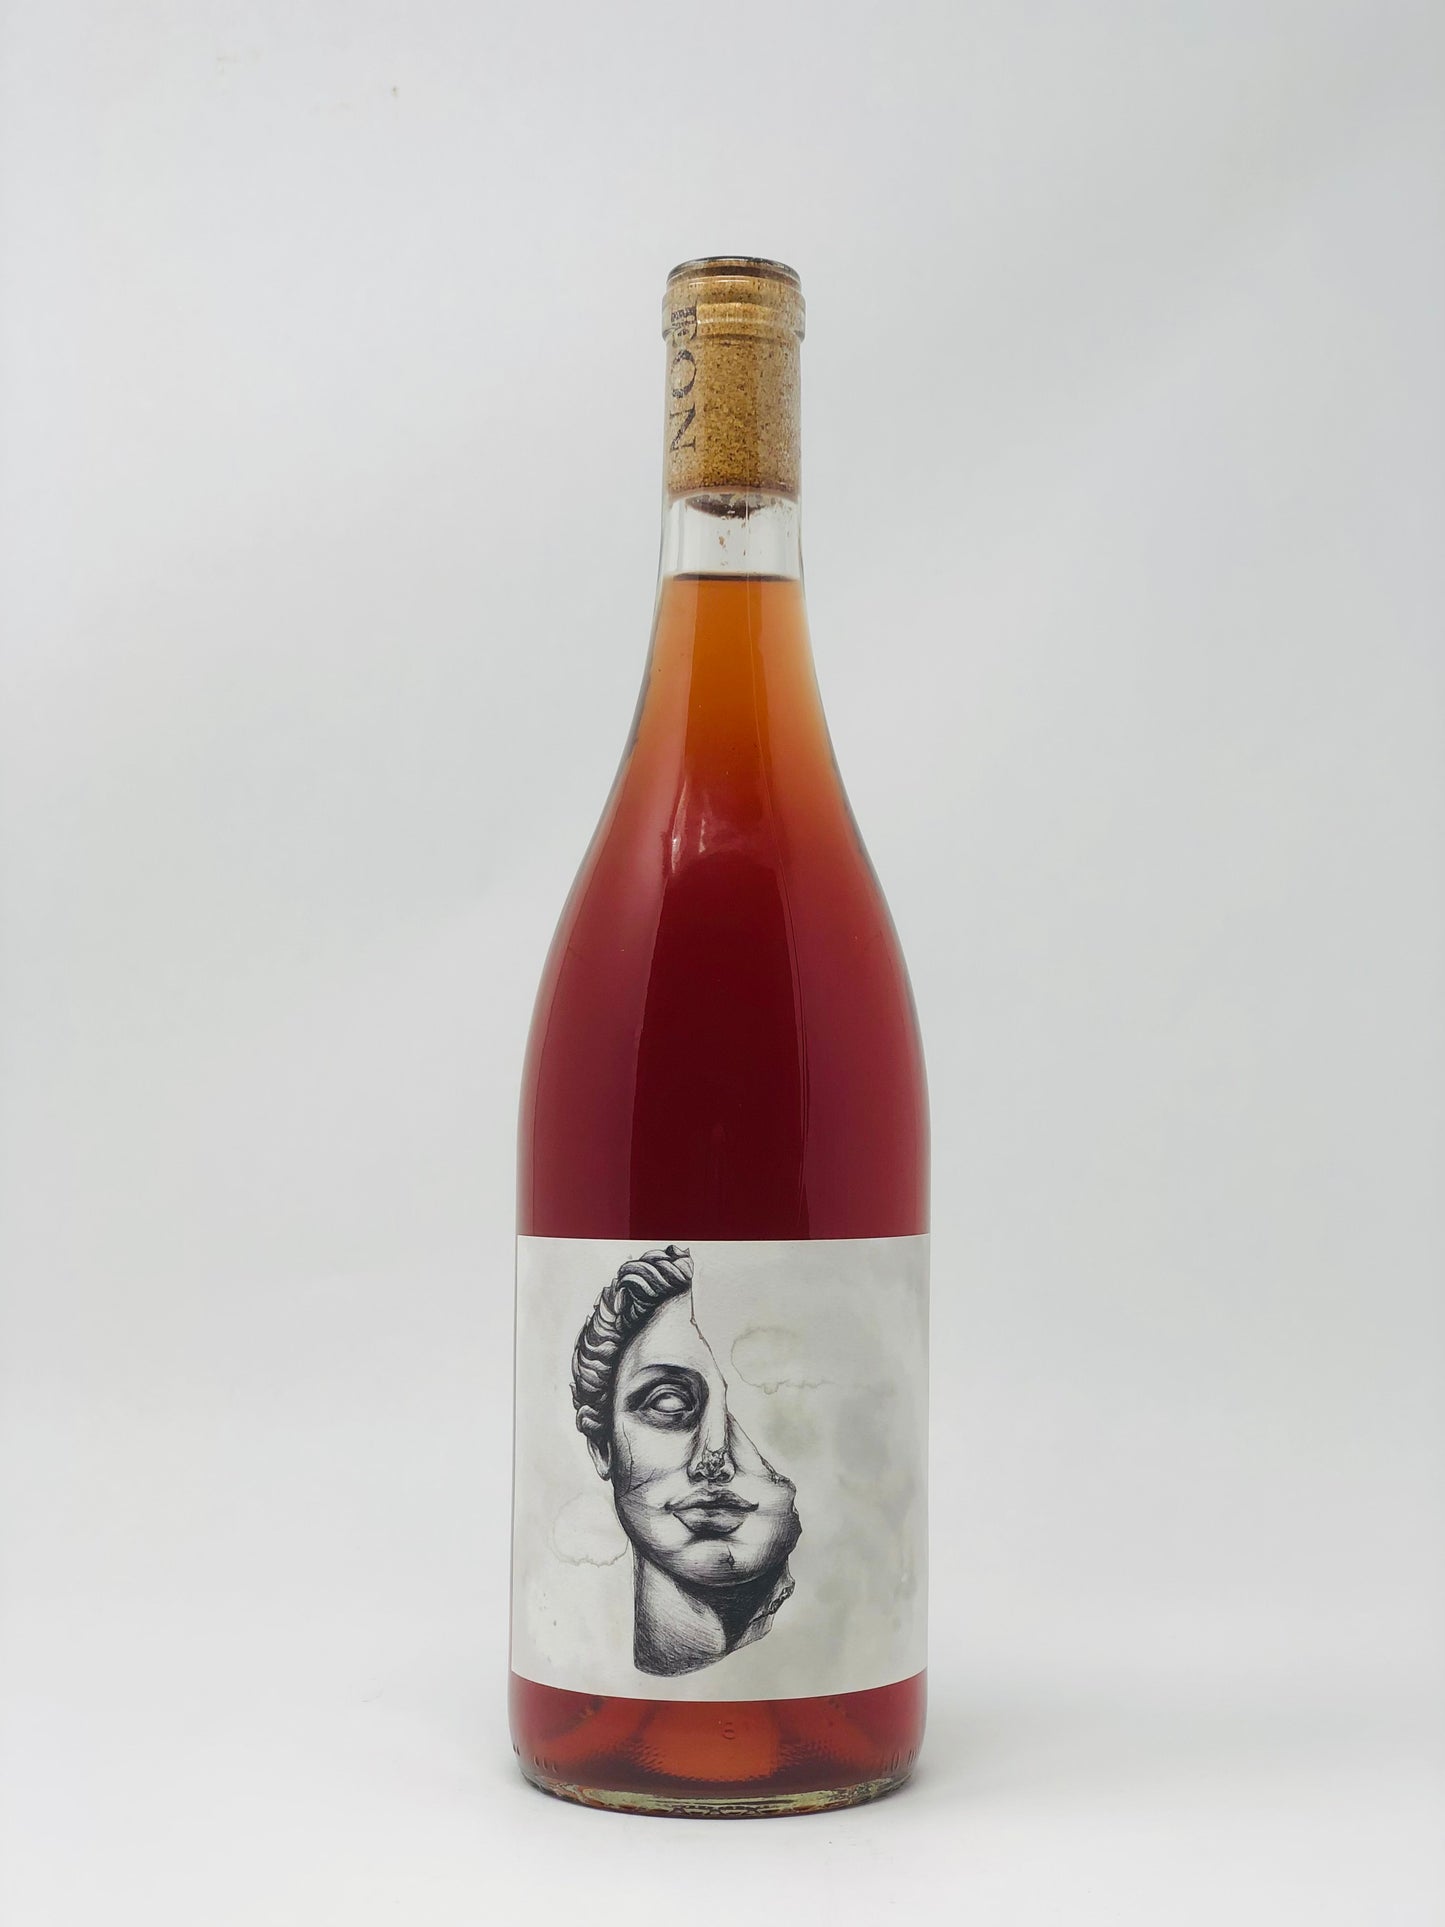 End of Nowhere Skin-Fermented Pinot Gris Spaceboy